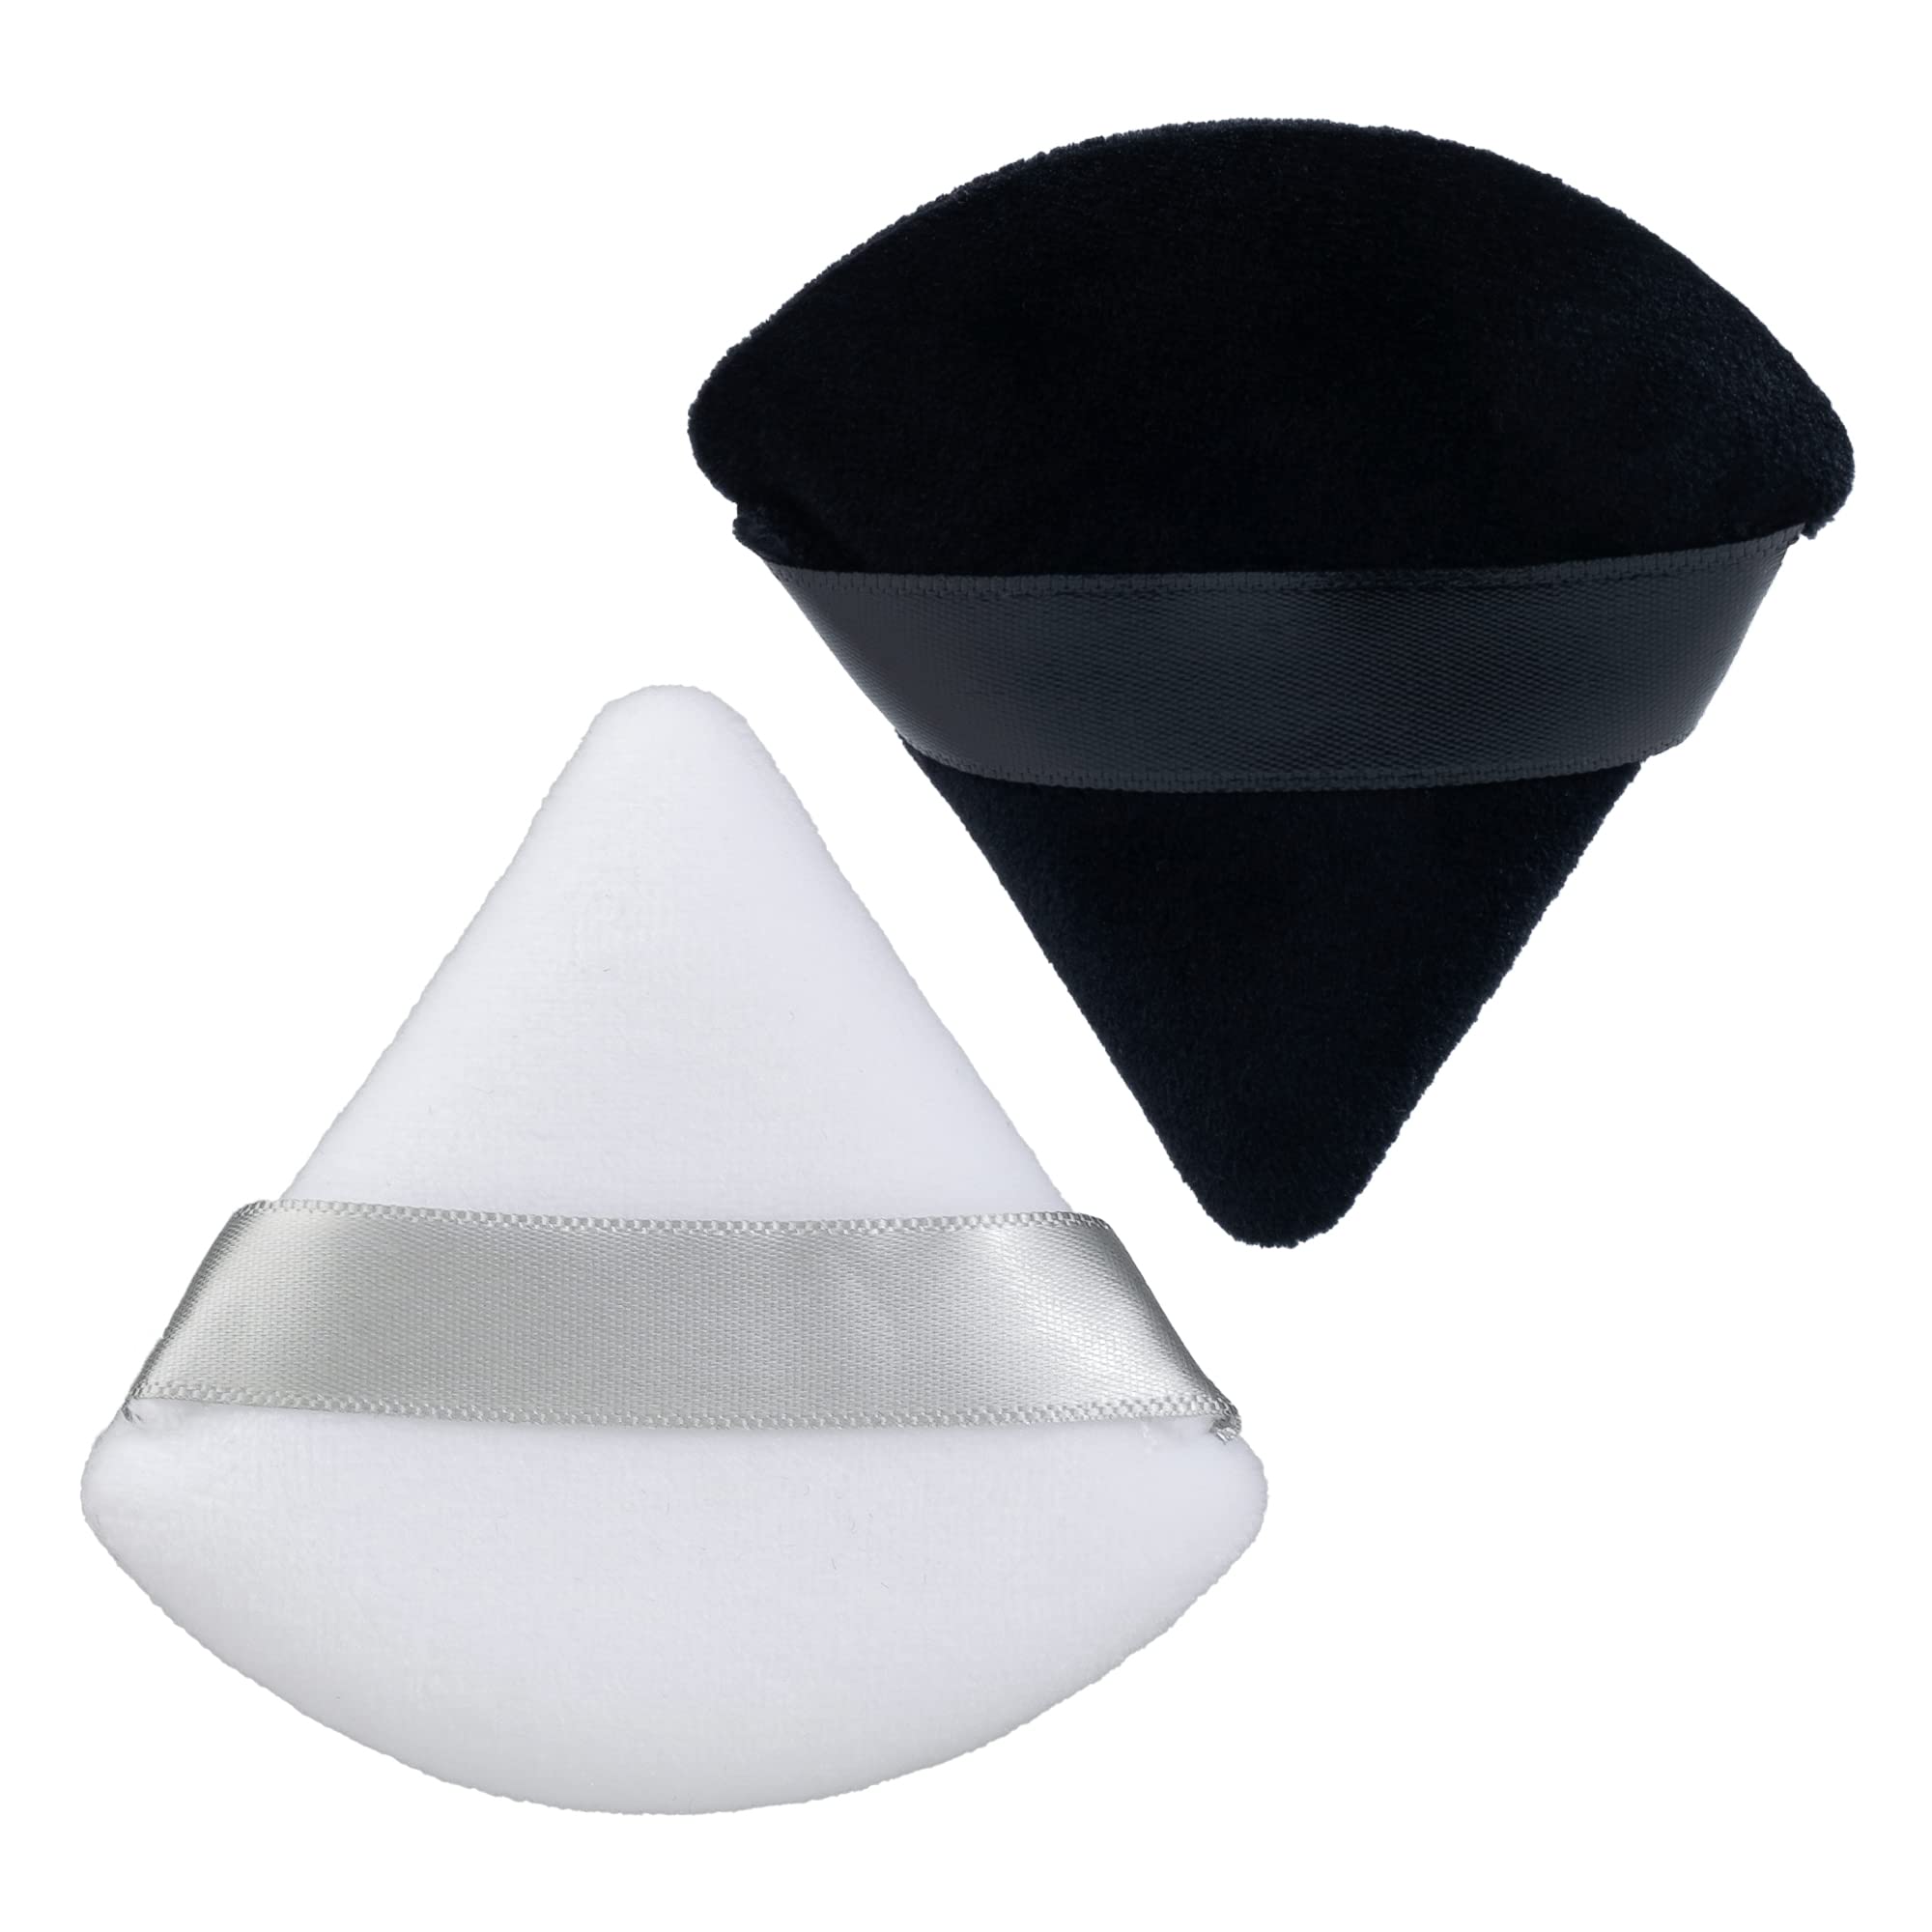 Powder Puffs, Black White 2 Pieces Triangle Powder Puffs Soft Makeup Velour Puff for Pressed Powder Loose Powder, Cotton Mini Powder Puff for Face Cosmetic Foundation Sponge Mineral Powder Dry Makeup